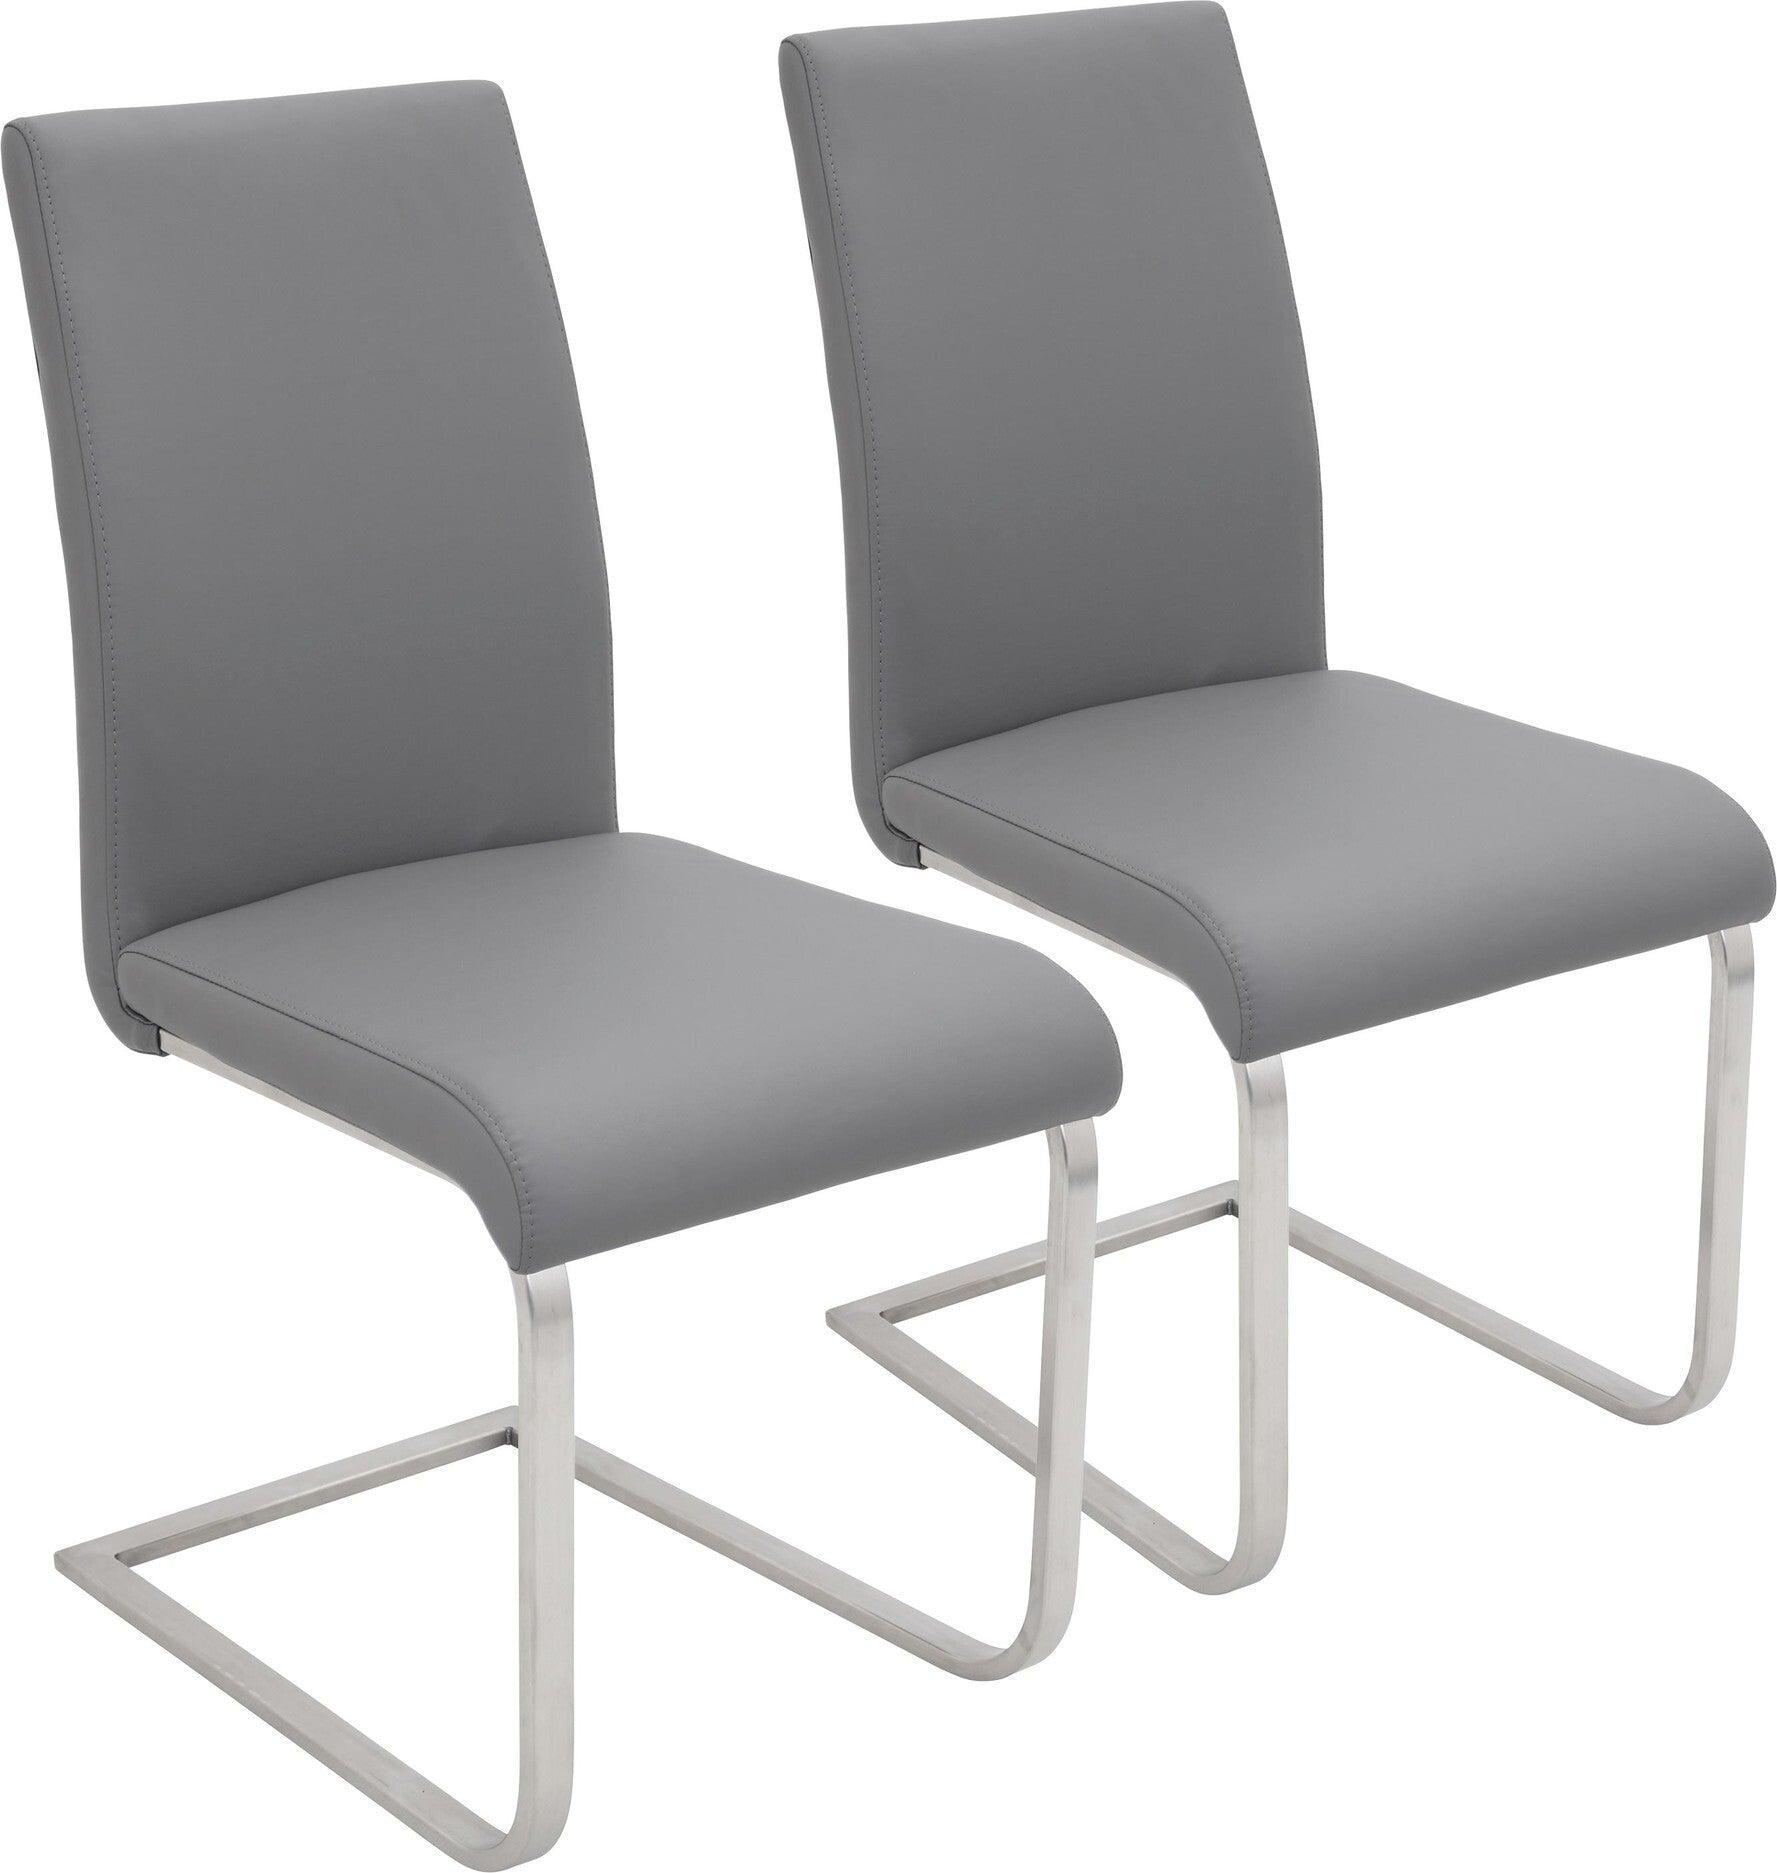 Lumisource Dining Chairs - Foster Contemporary Dining Chair in Grey Faux Leather (Set of 2)